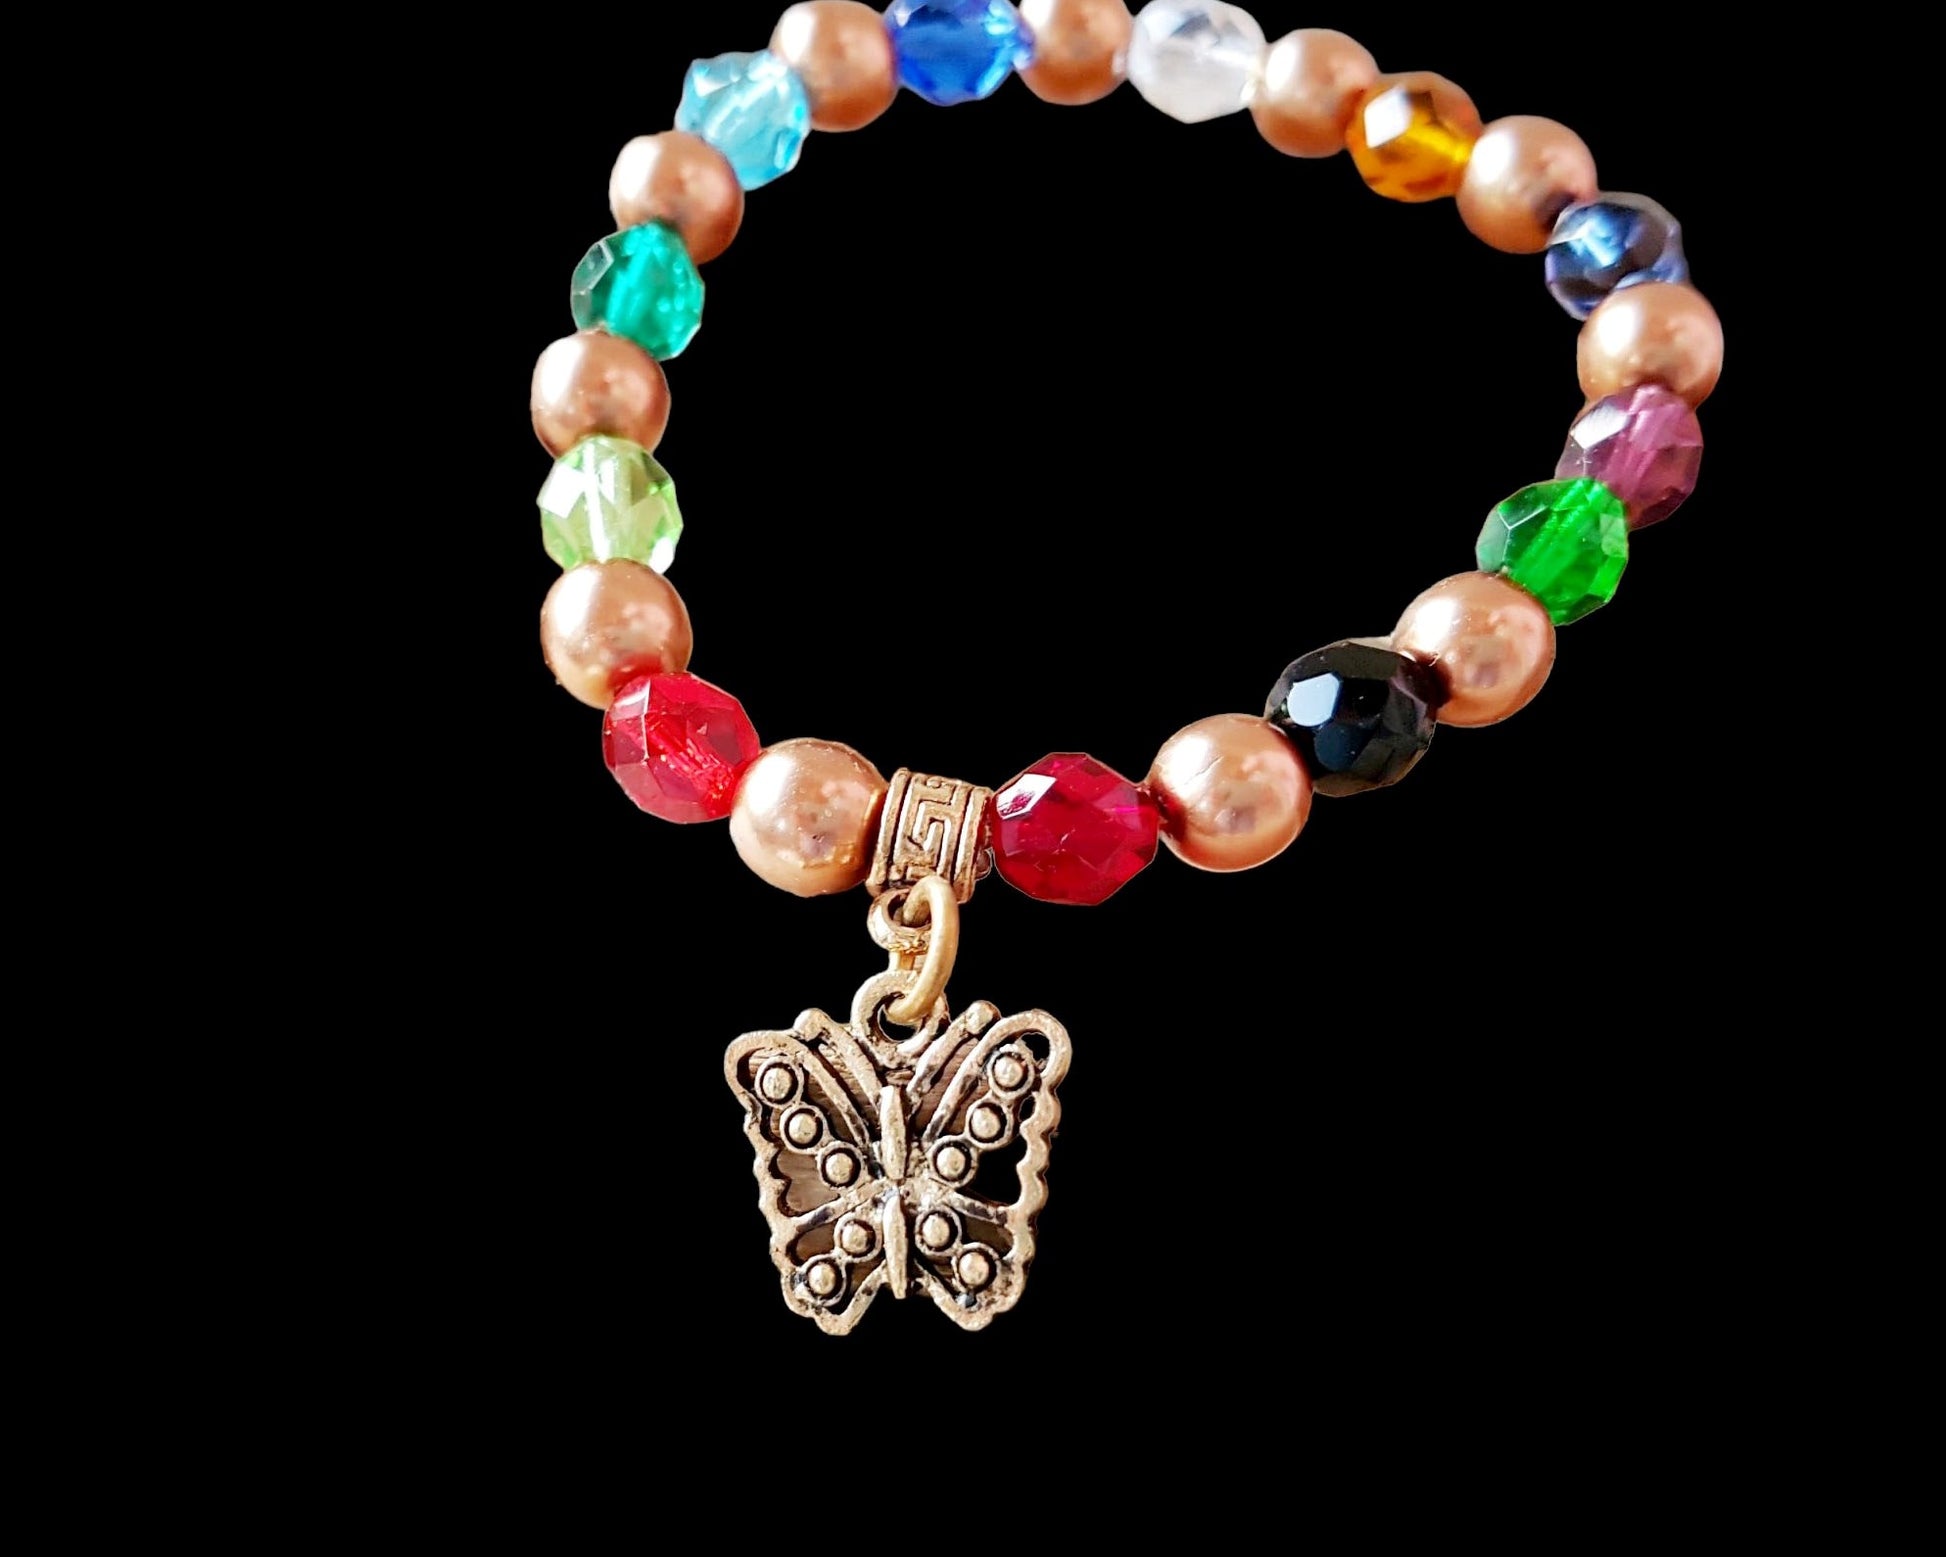 Twelve Stone Butterfly Pearl Bracelet with Twelve Color Glass Stones Inspired by the Breast Plate High Priest Exodus 28, with Gold Pearls and Butterfly Pendant